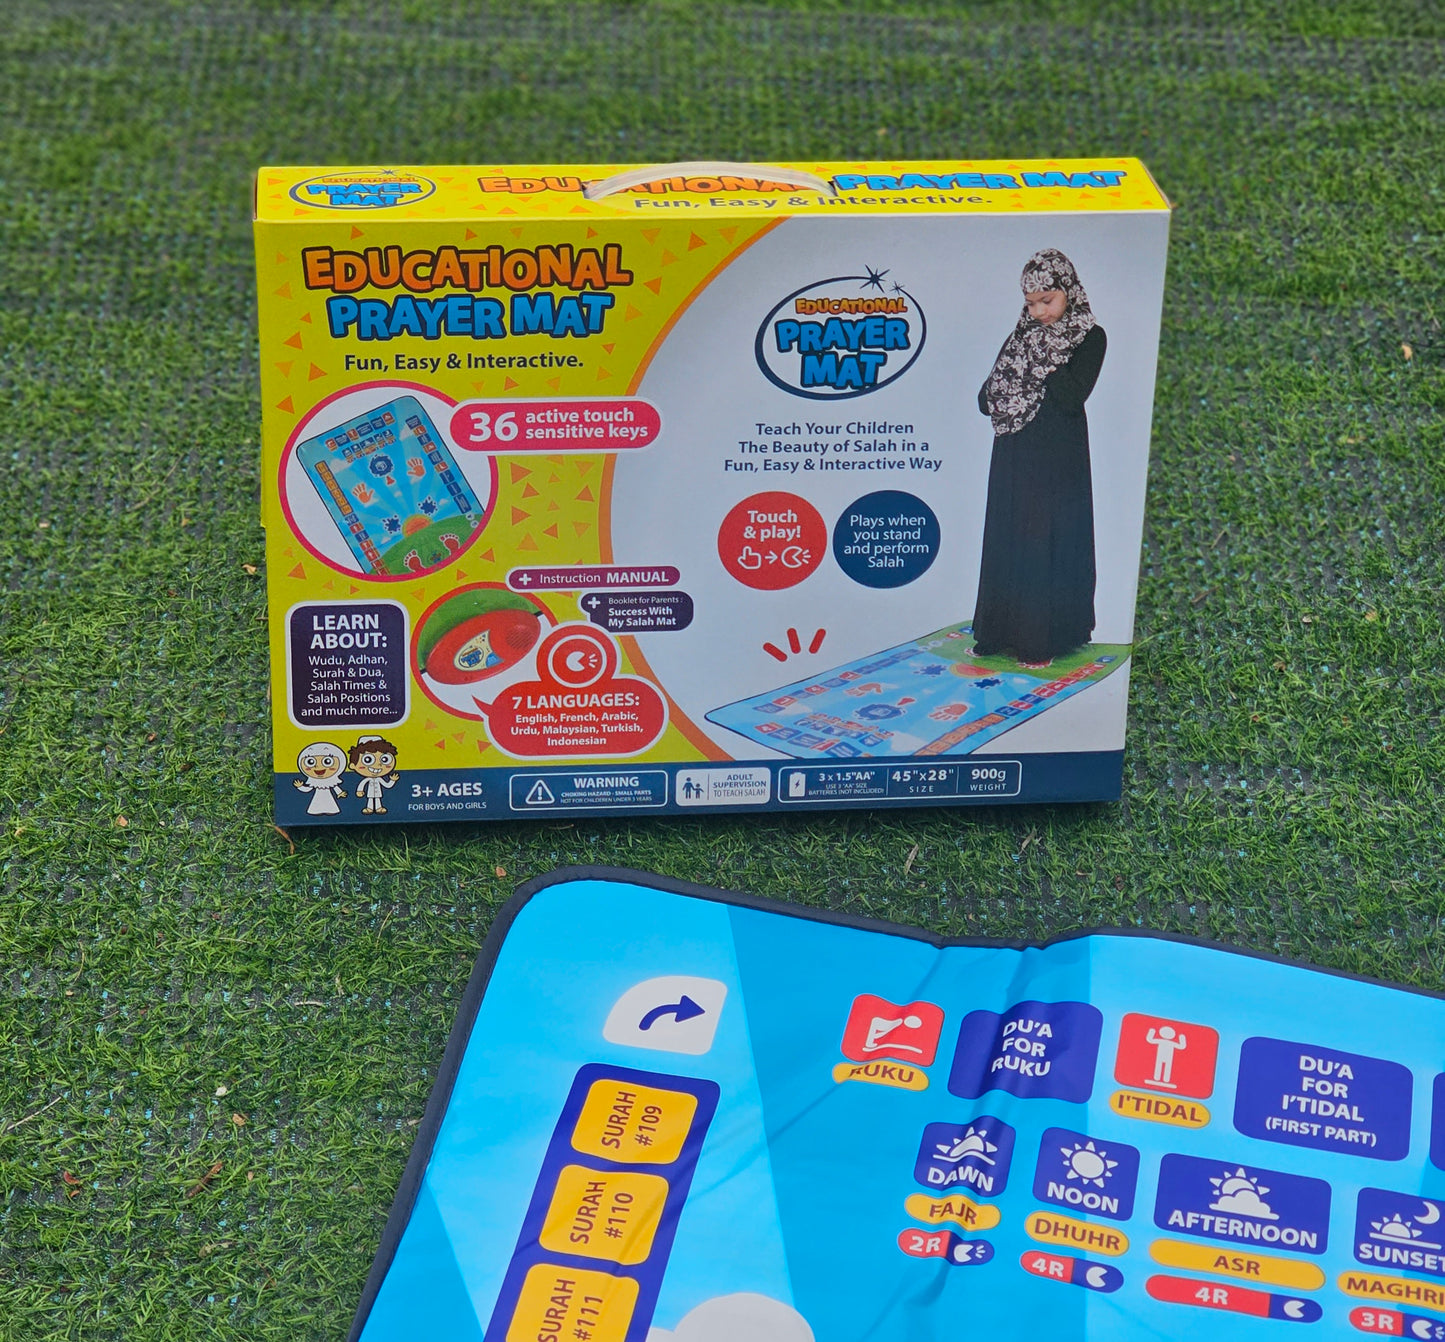 Kids' educational prayer mat with free Iqrah book marker